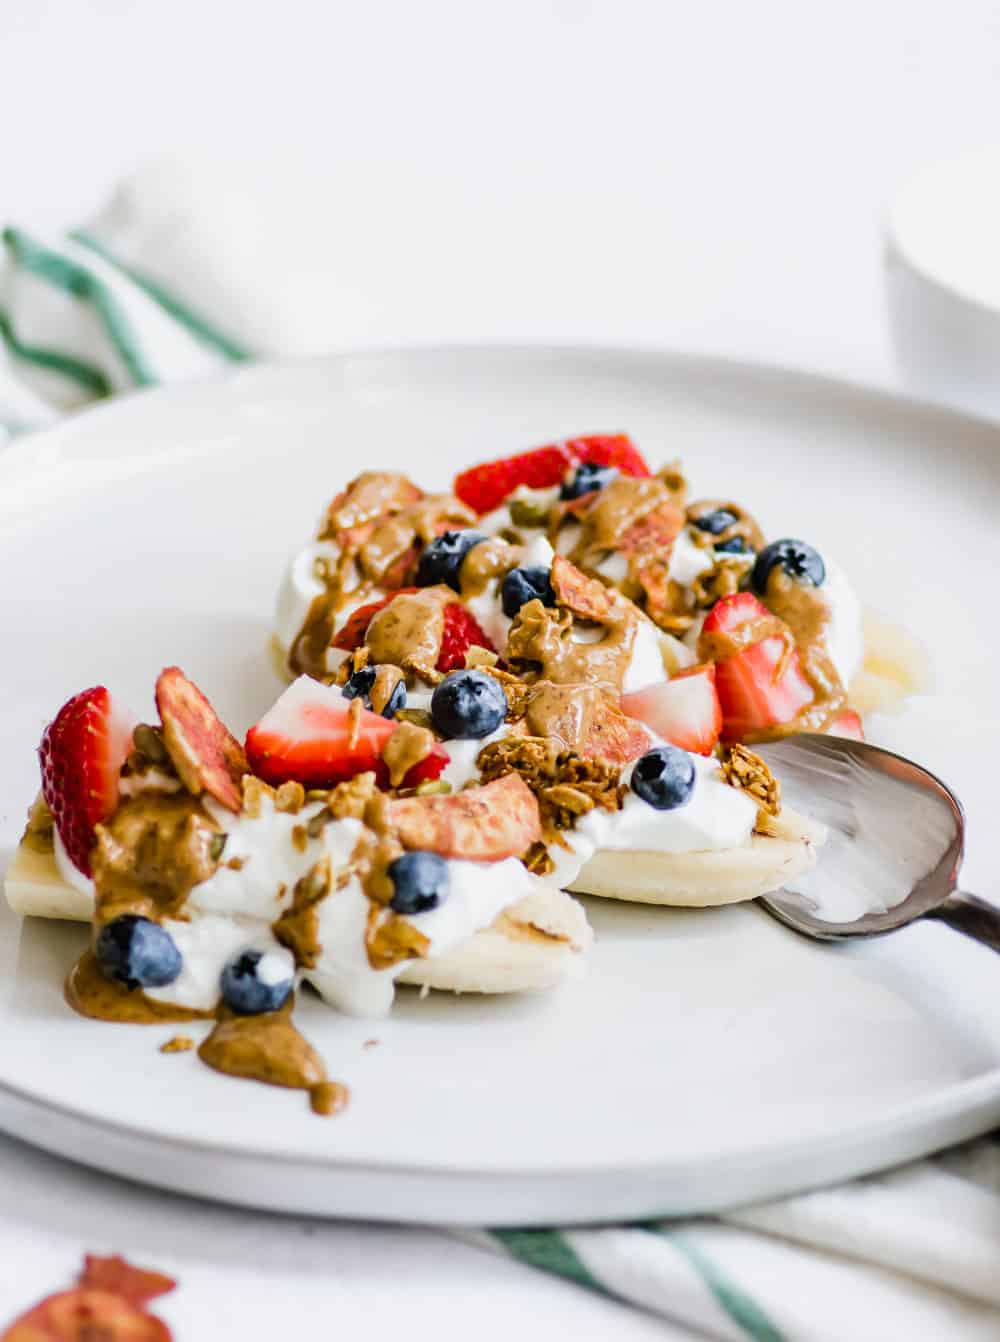 Make this Healthy Banana Split recipe as a better-for-you laternative to the traditiaonal dessert. Serve as an afternoon snack, or as a twist on breakfast. Made with only 5 ingredients, this dish can be made in just 5 minutes. It's a recipe the whole family will love! || The Butter Half #snackrecipes #breakfastrecipes #healthydesserts #bananasplitrecipe #thebutterhalf